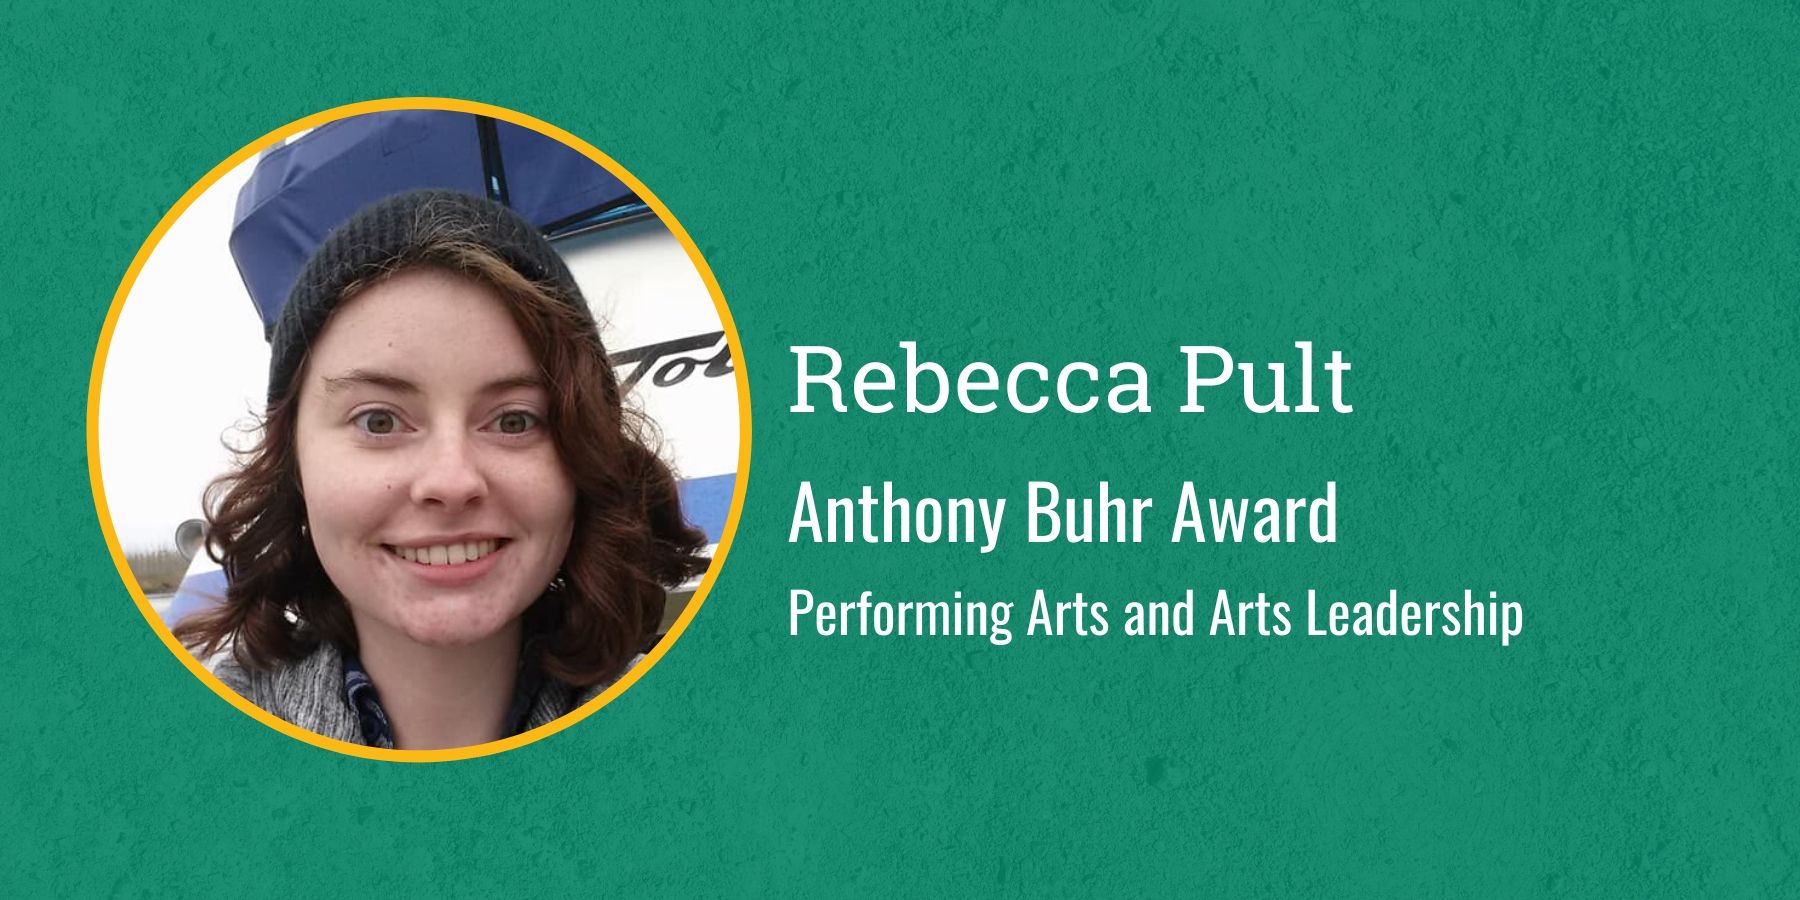 Photo of Rebecca Pult and text Anthony Buhr Award, Performing Arts and Arts Leadership